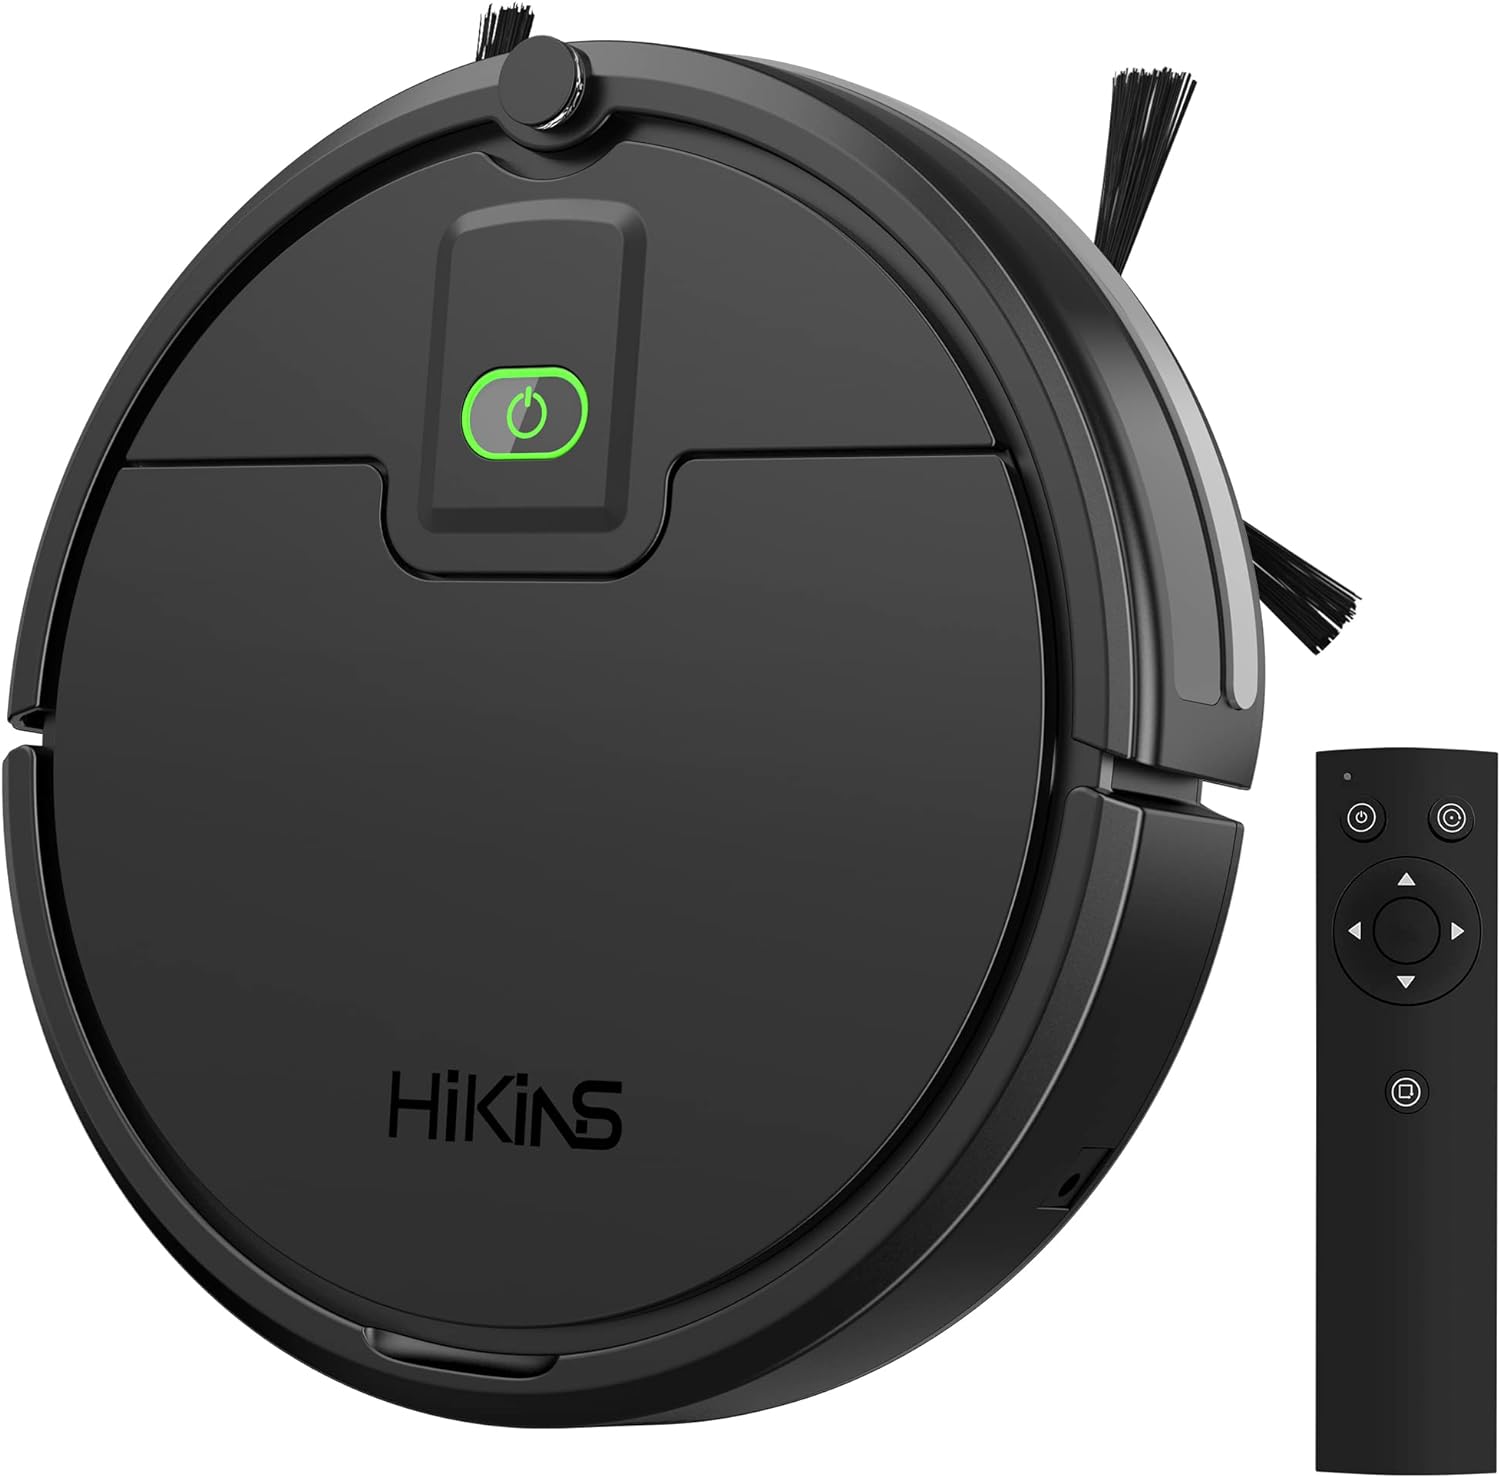 HiKiNS Robot Vacuum Review: Affordable and Powerful Cleaner